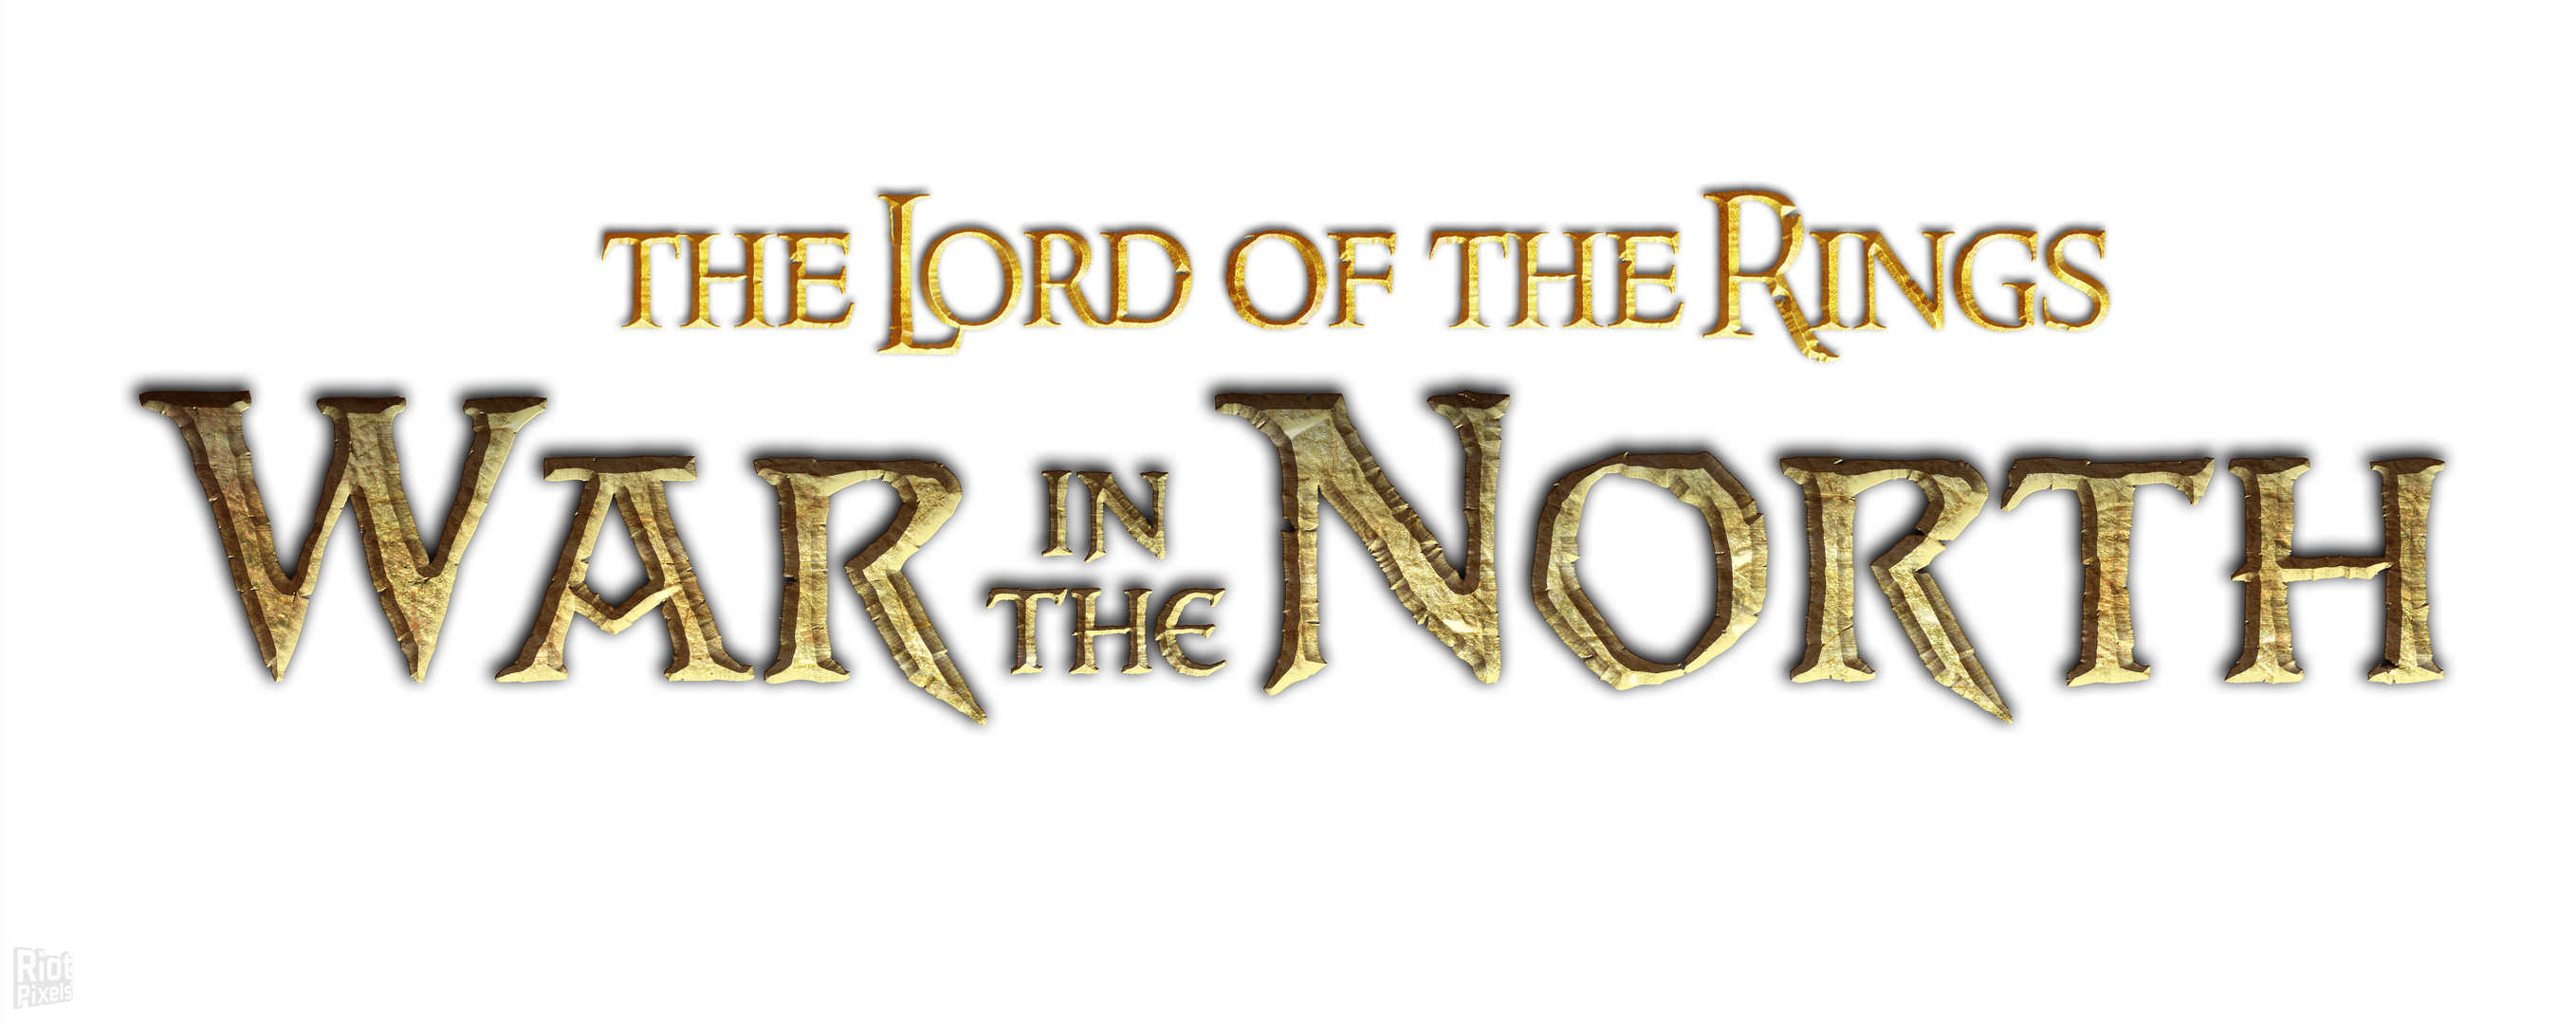 The lord of the rings war in the north купить ключ steam фото 111